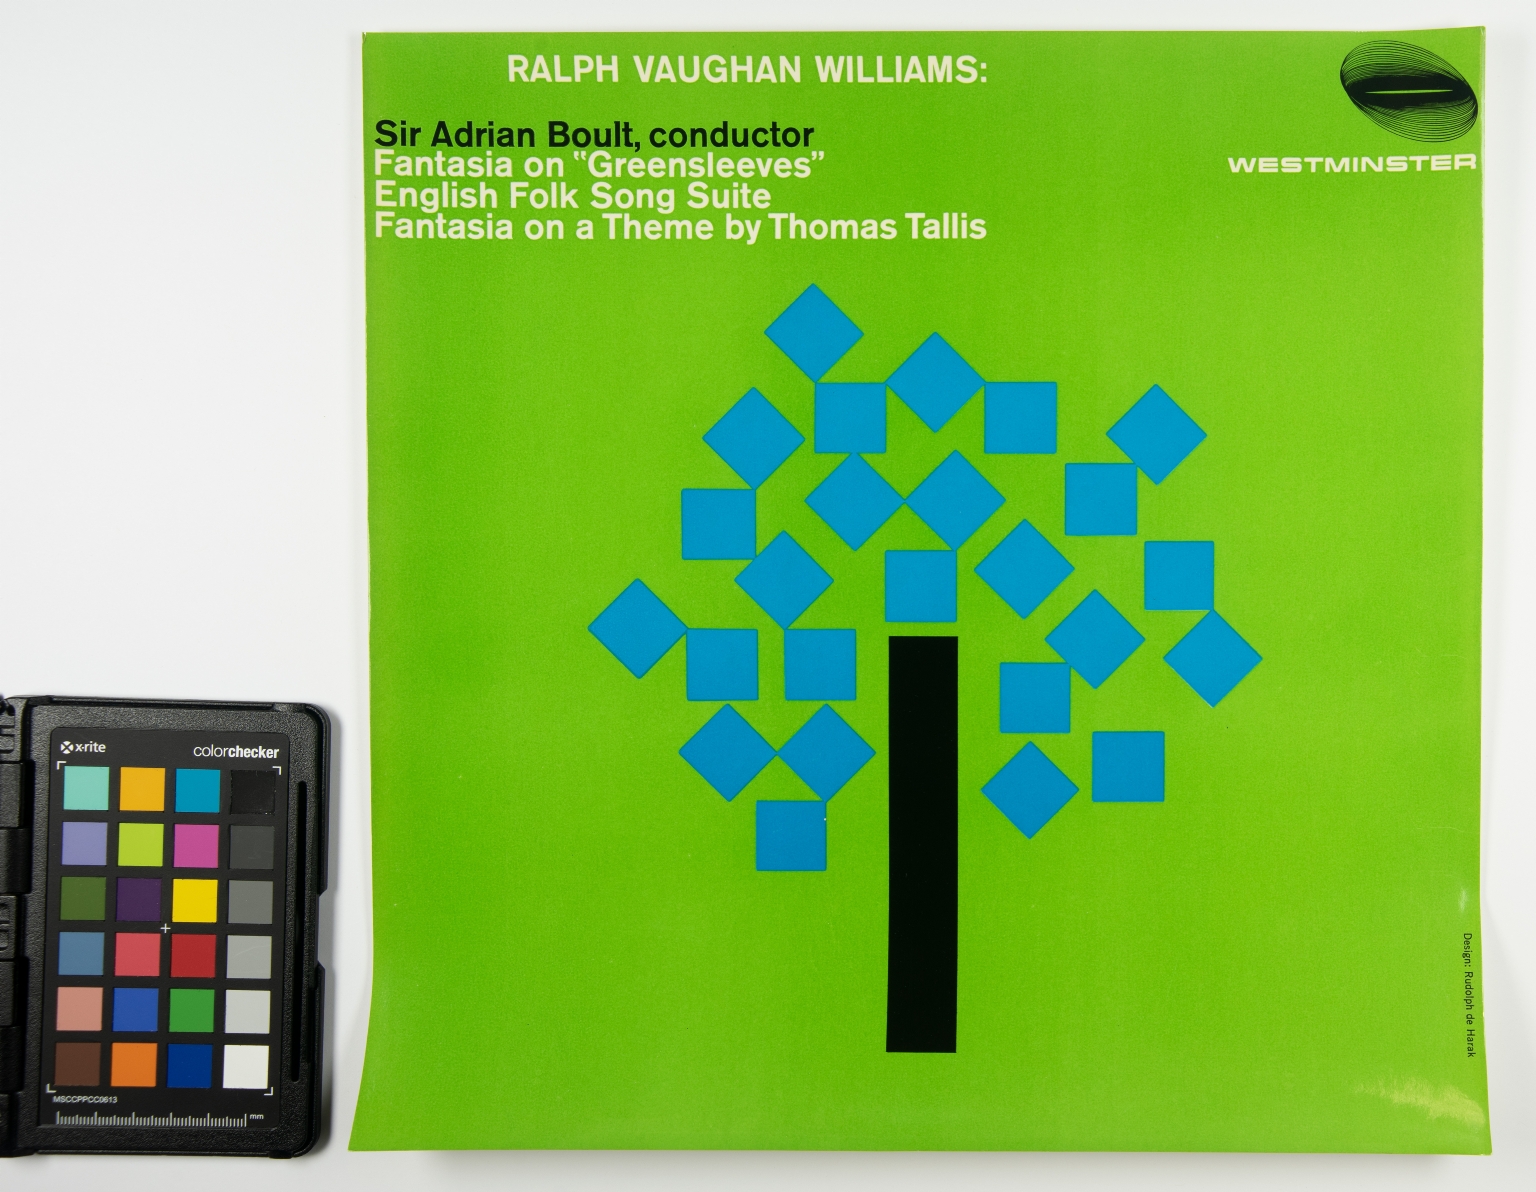 Ralph Vaughan Williams: Conducted by Sir Adrian Boult